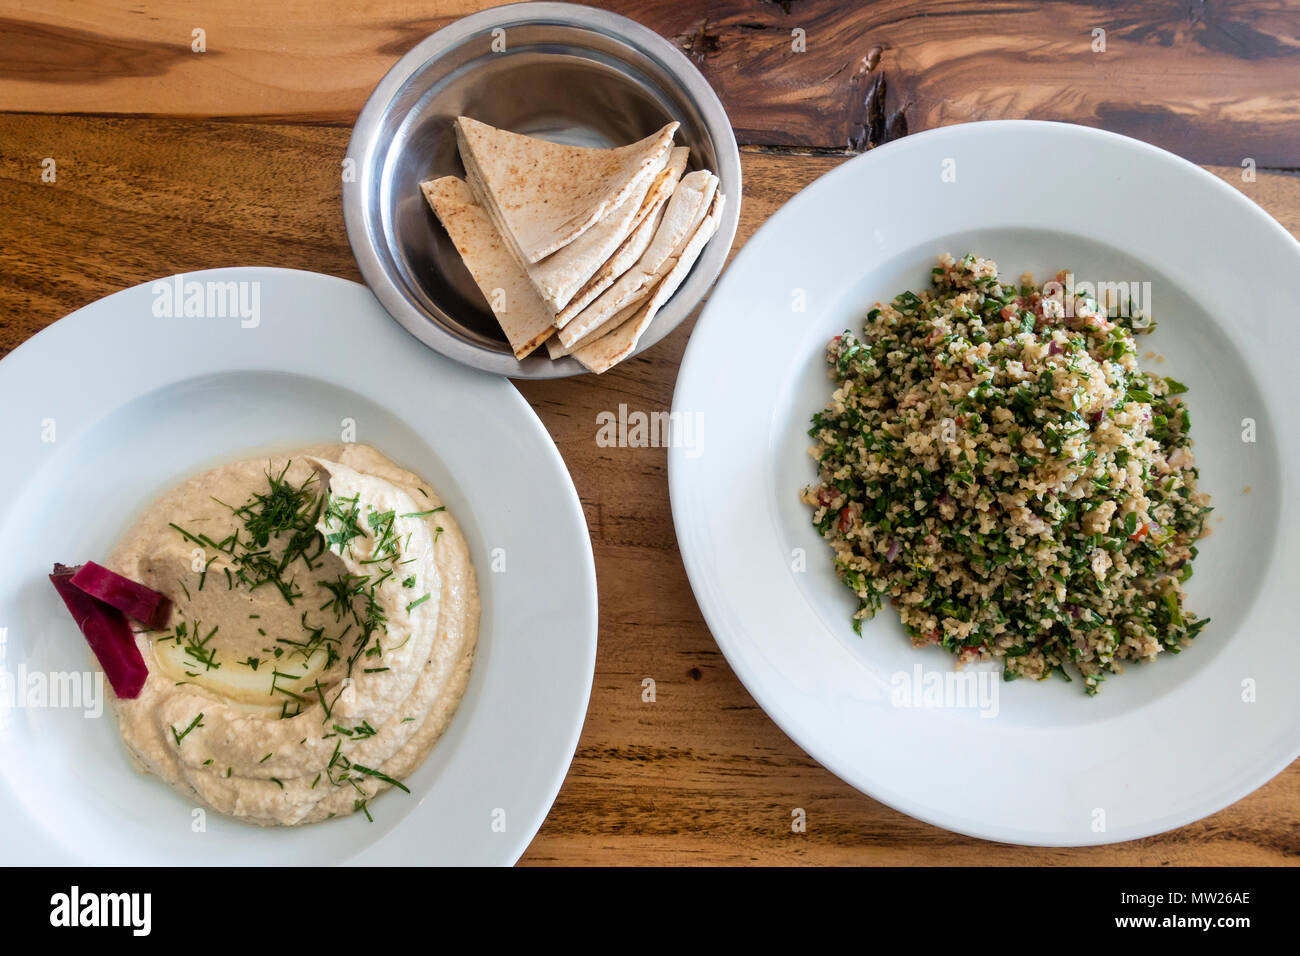 Mediterranean food on a wooden table, includes baba ganoush dip, tabbouleh, and pita bread Stock Photo